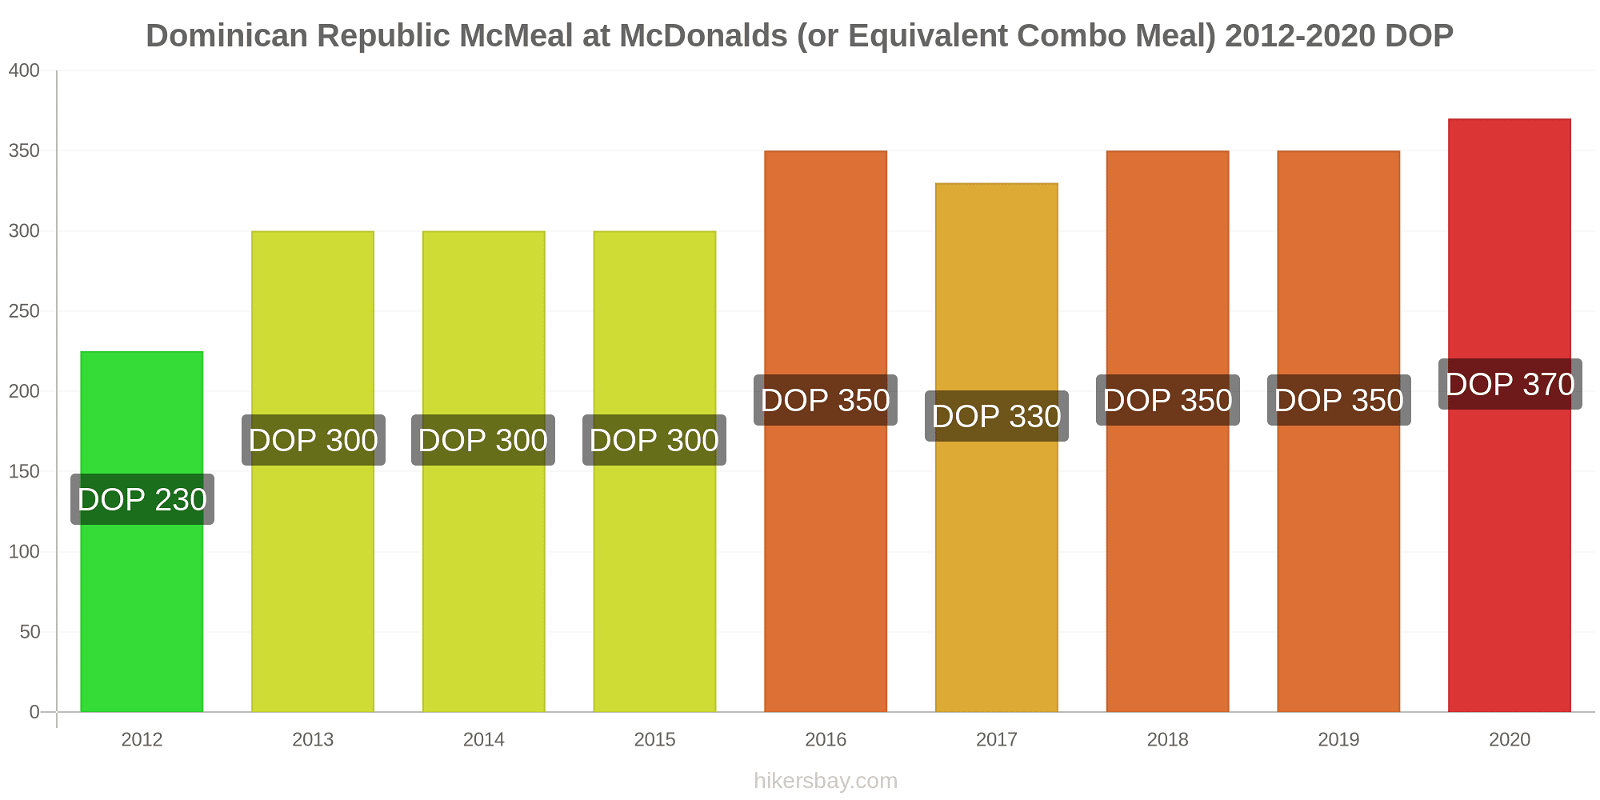 Dominican Republic price changes McMeal at McDonalds (or Equivalent Combo Meal) hikersbay.com